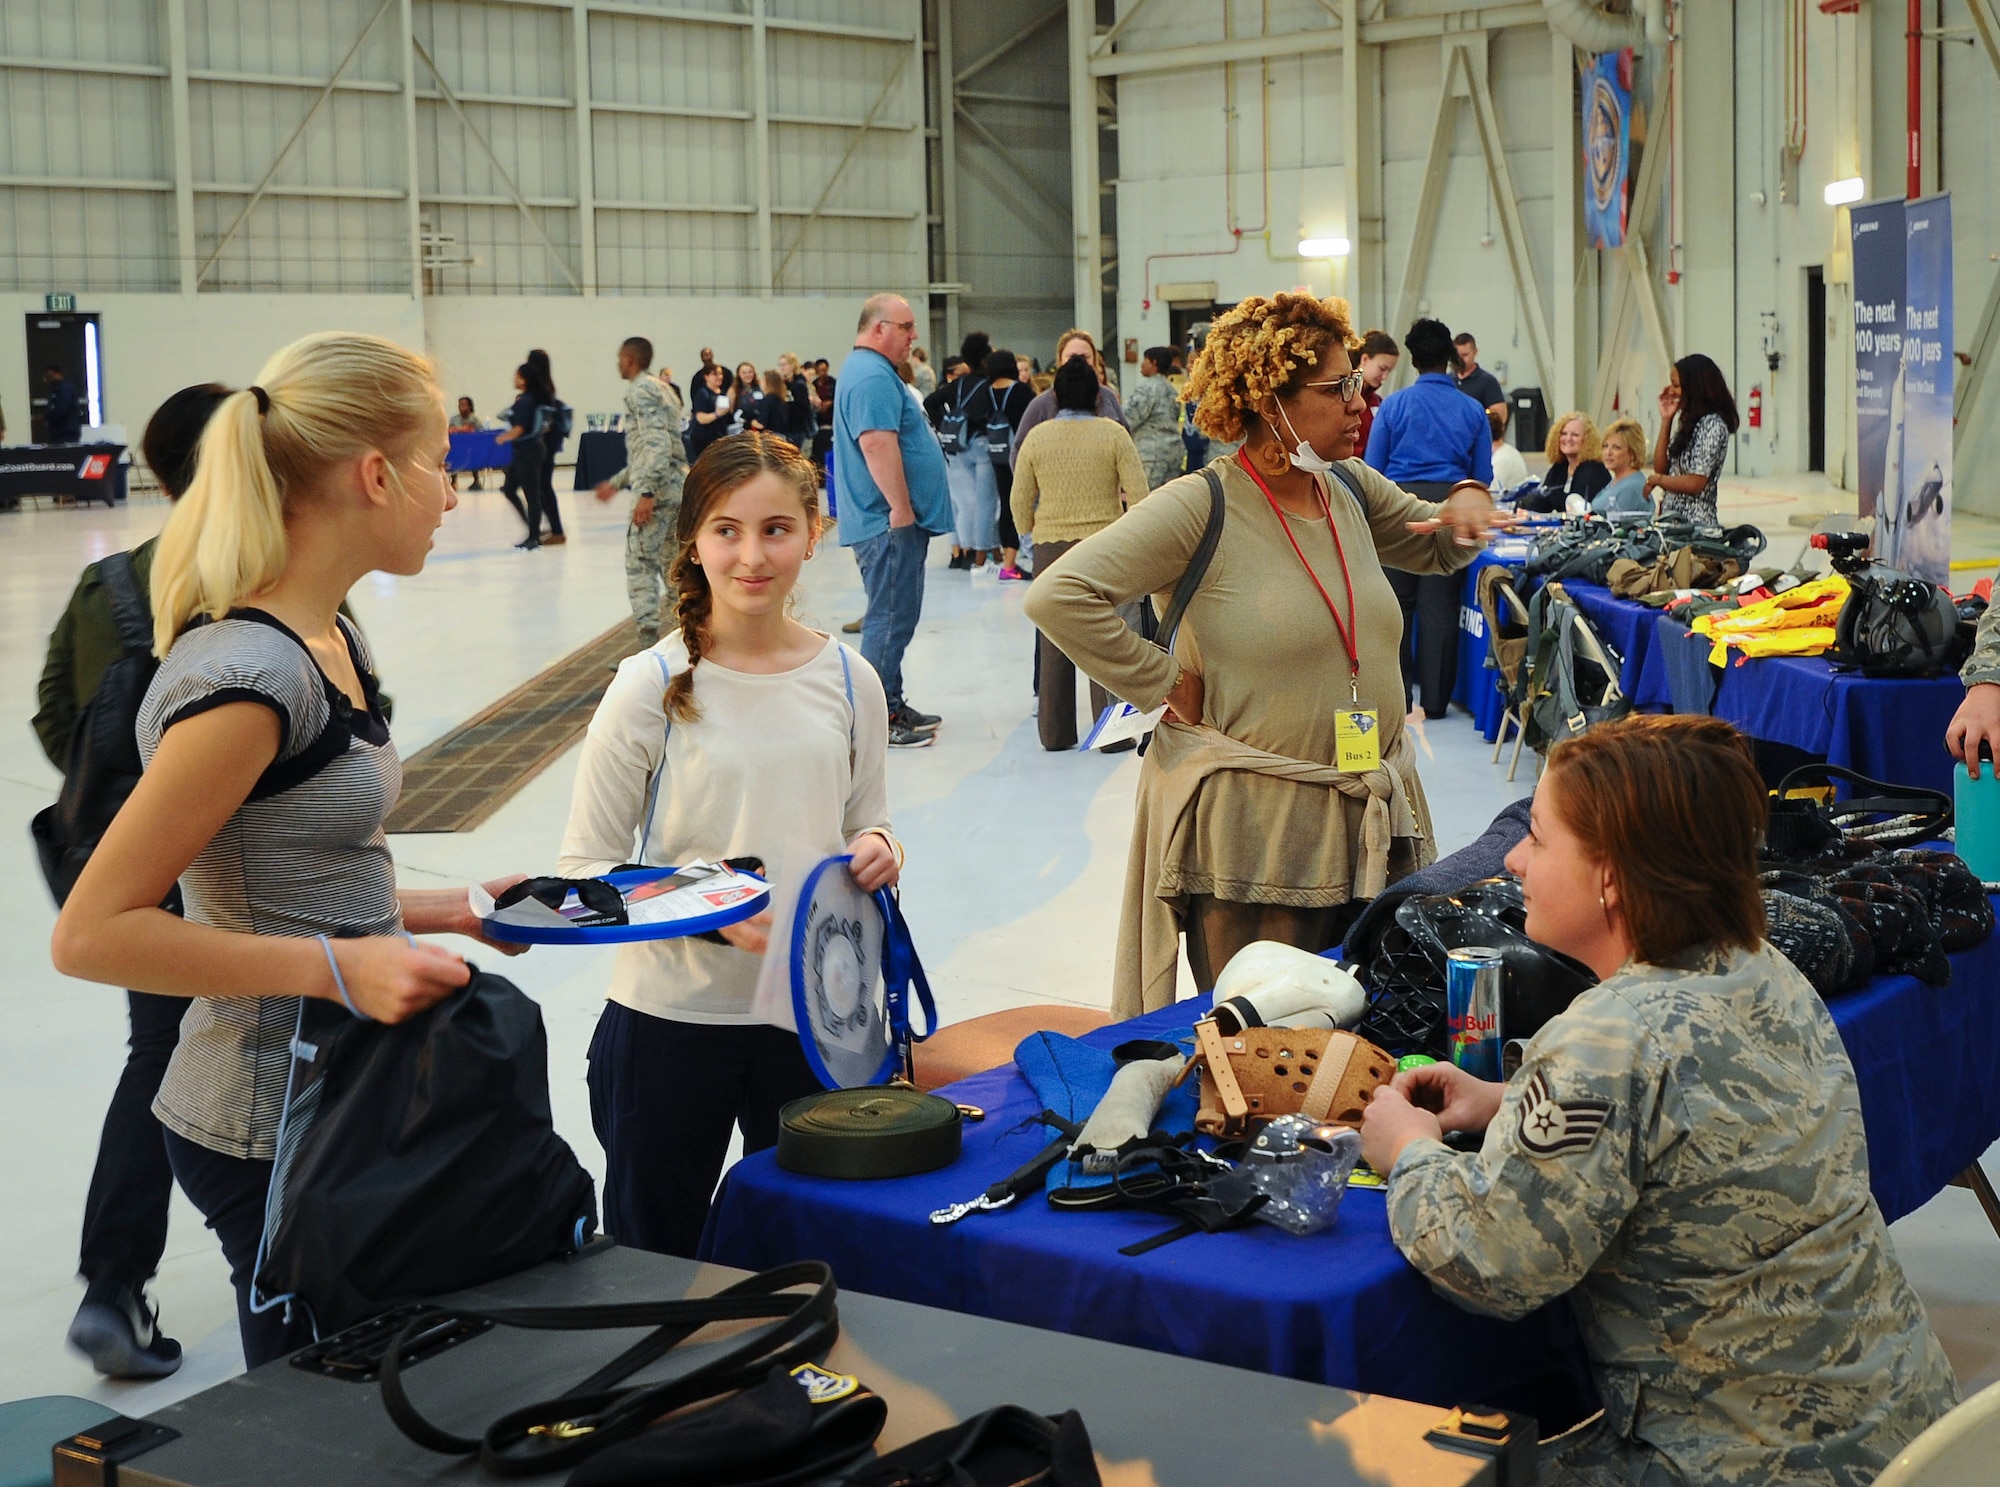 Staff Sgt. Angela Loew, 628th Security Force Squadron military working dog handler, speaks to girls at the 10th Annual Joint Base Charleston Women in Aviation Career Day March 20 at Joint Base Charleston, S.C. (U.S. Air Force Photo by Senior Airman Tom Brading)